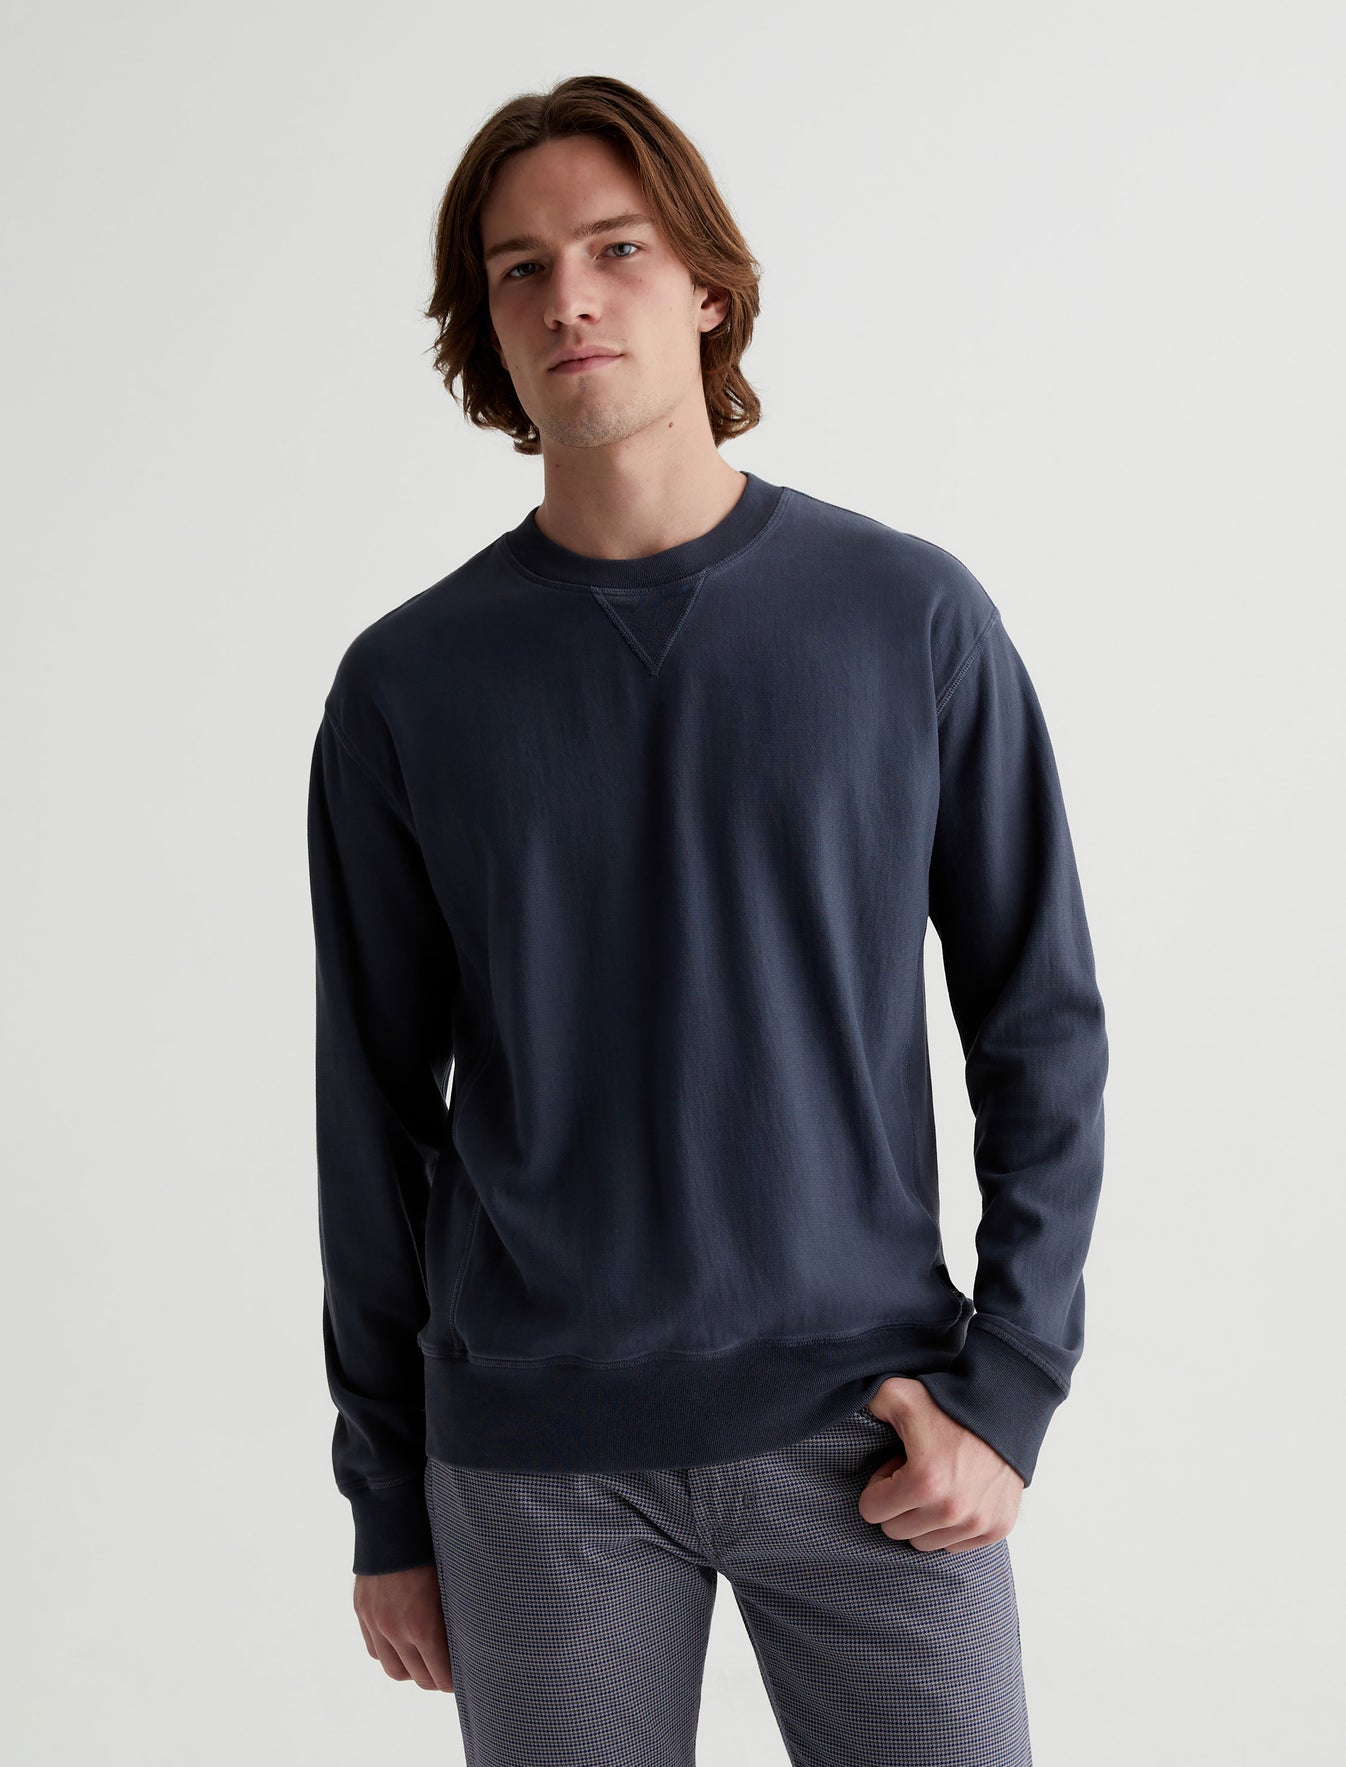 Arc Panelled Sweatshirt 5 Years Melange Smoke Relaxed Fit Crew Neck Panelled Mens Top Photo 1